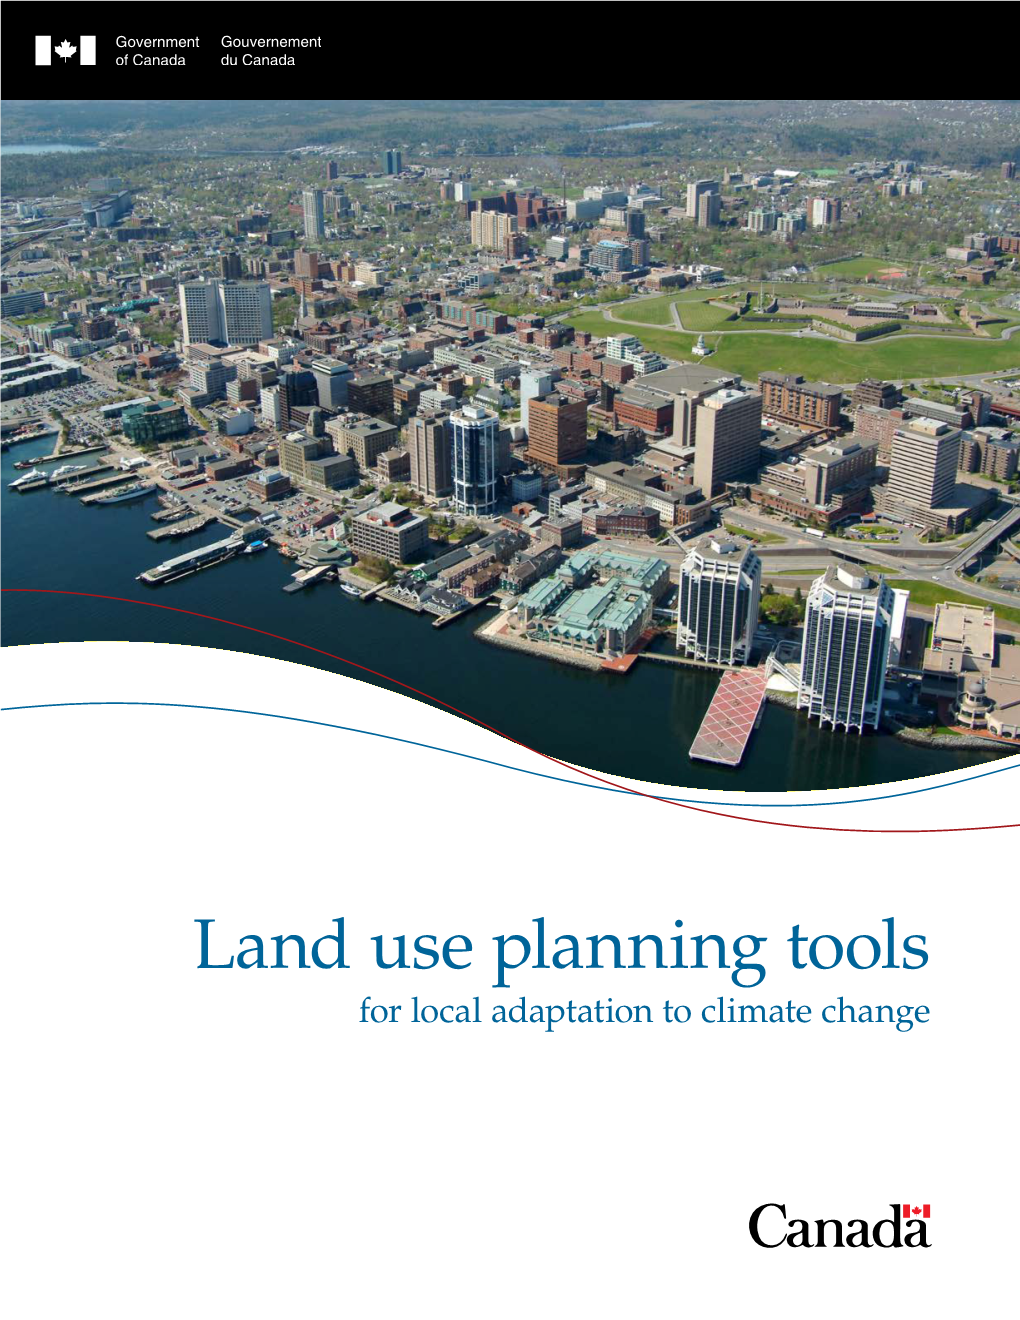 Land Use Planning Tools for Local Adaptation to Climate Change